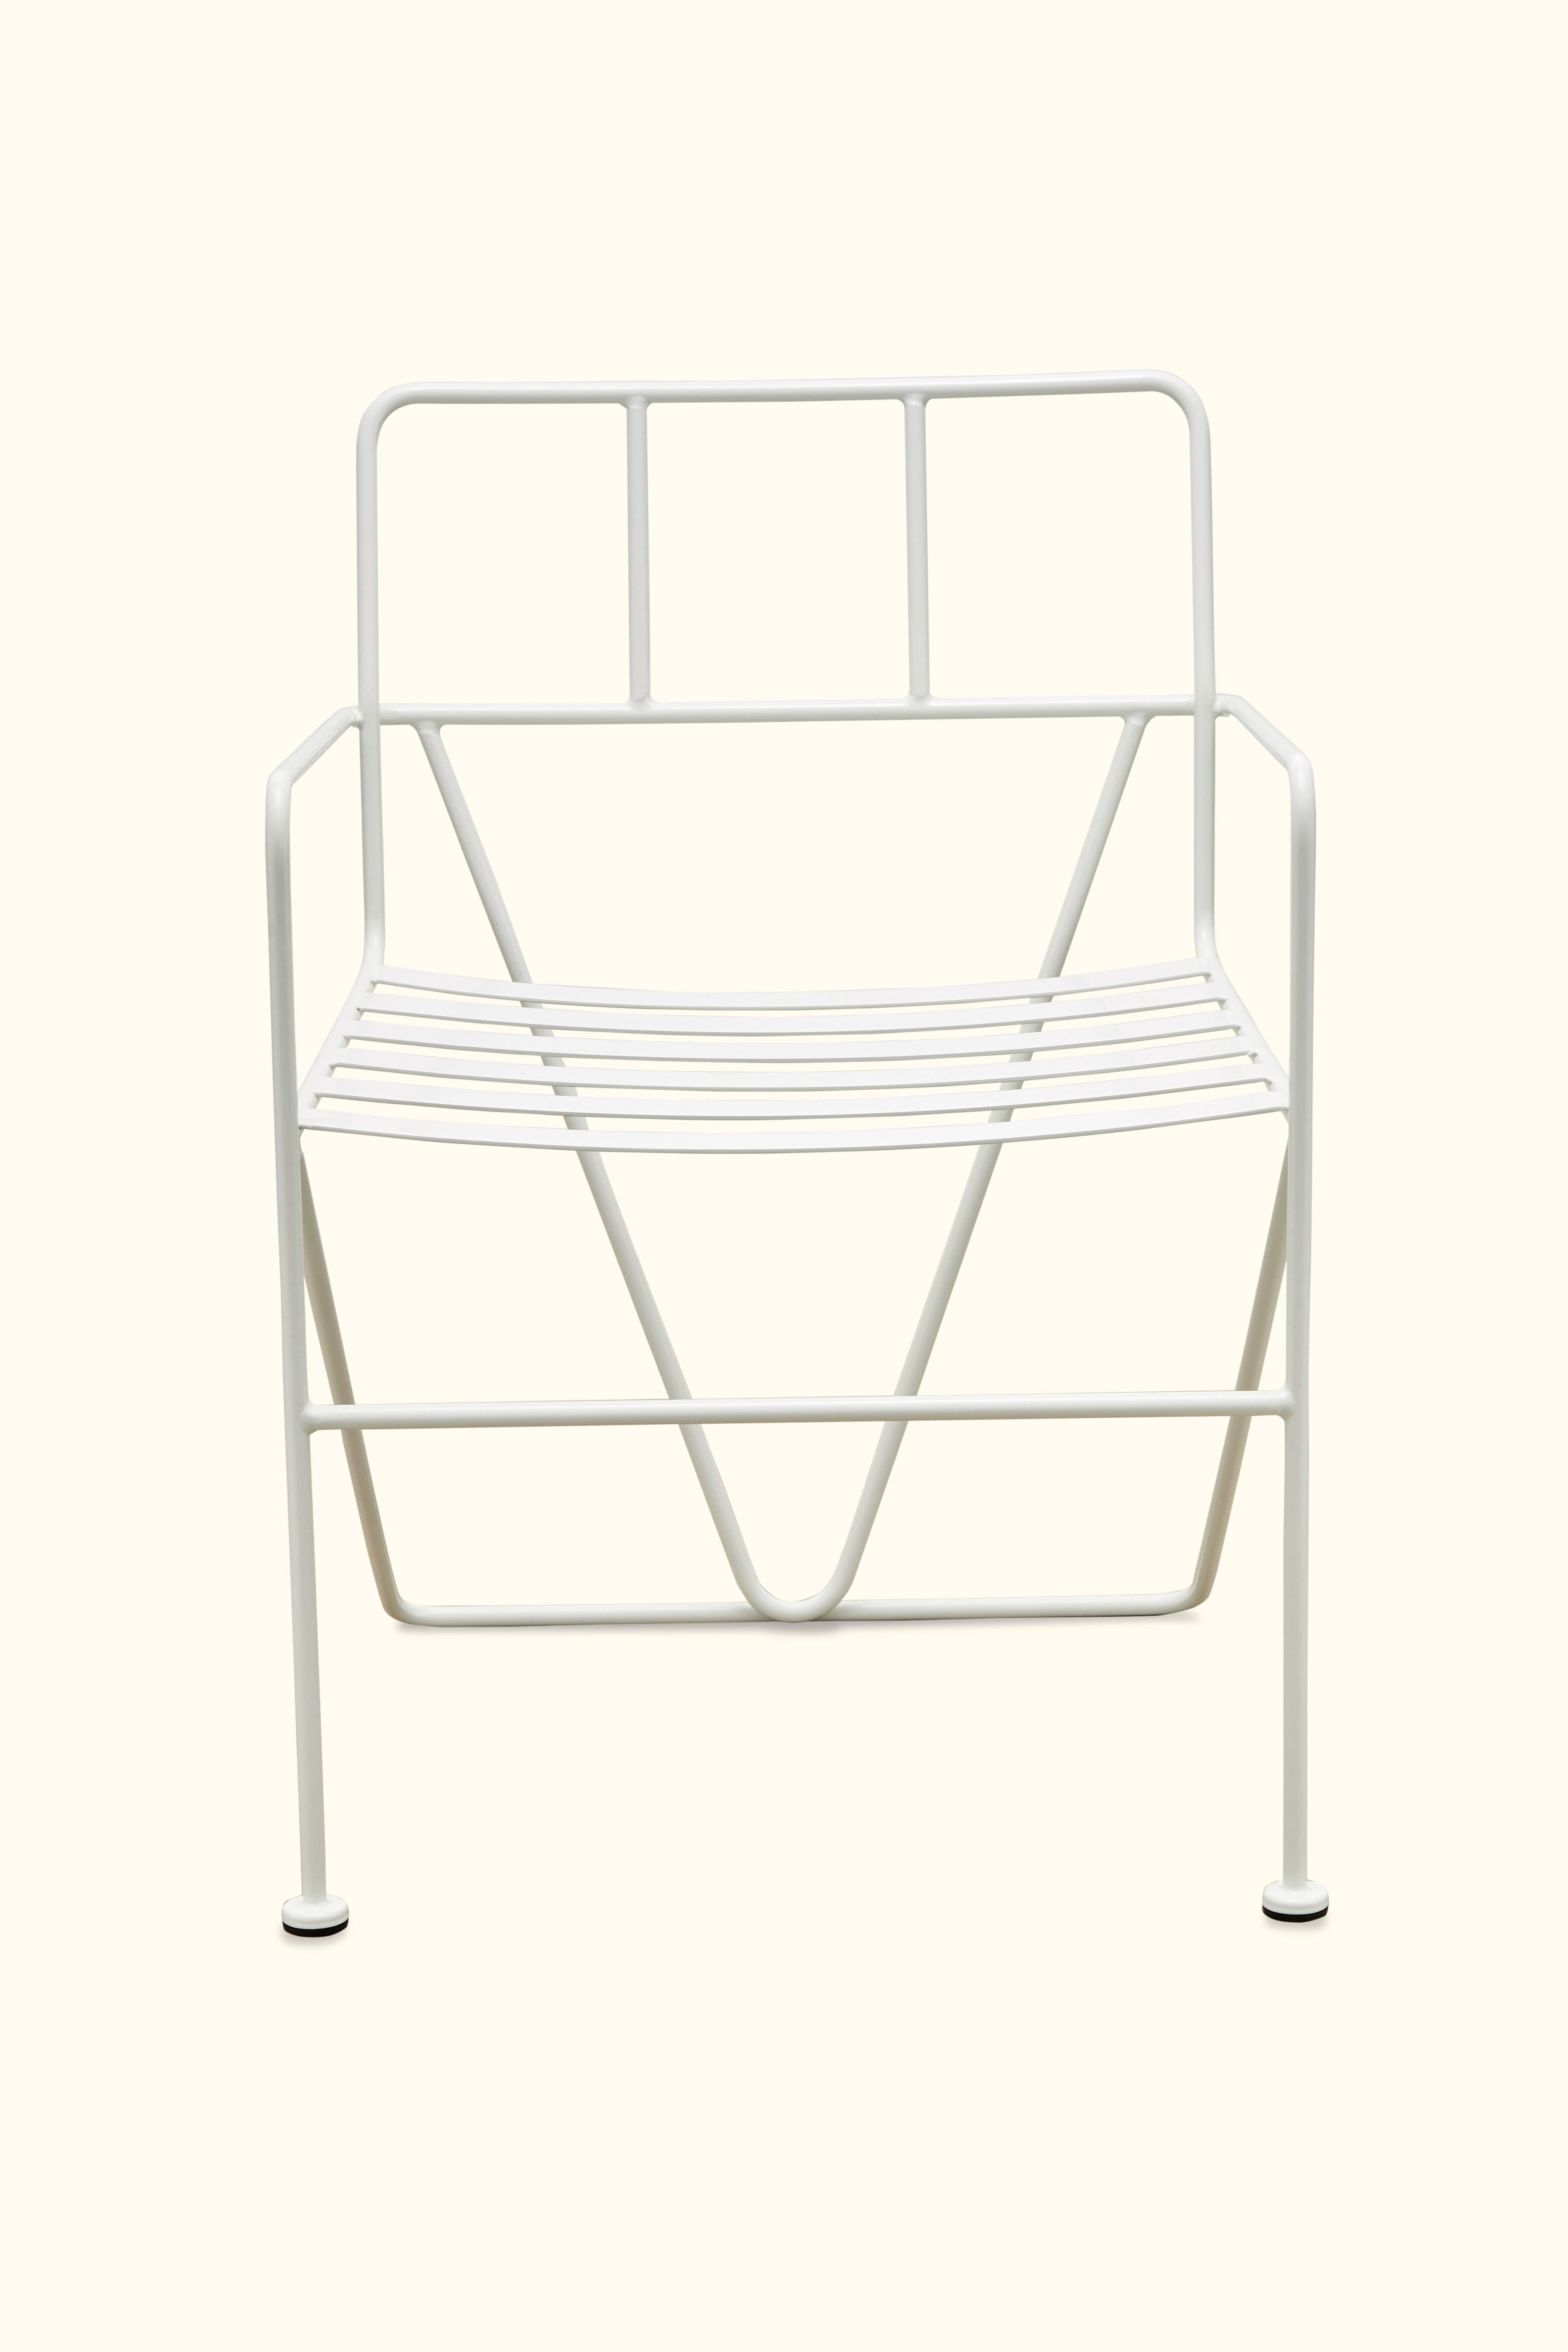 The Montrose dining chair has a powder-coated steel frame with removable back and seat cushions. For indoor or outdoor use.

As shown: $1,525
To order: 1,450 + COM.